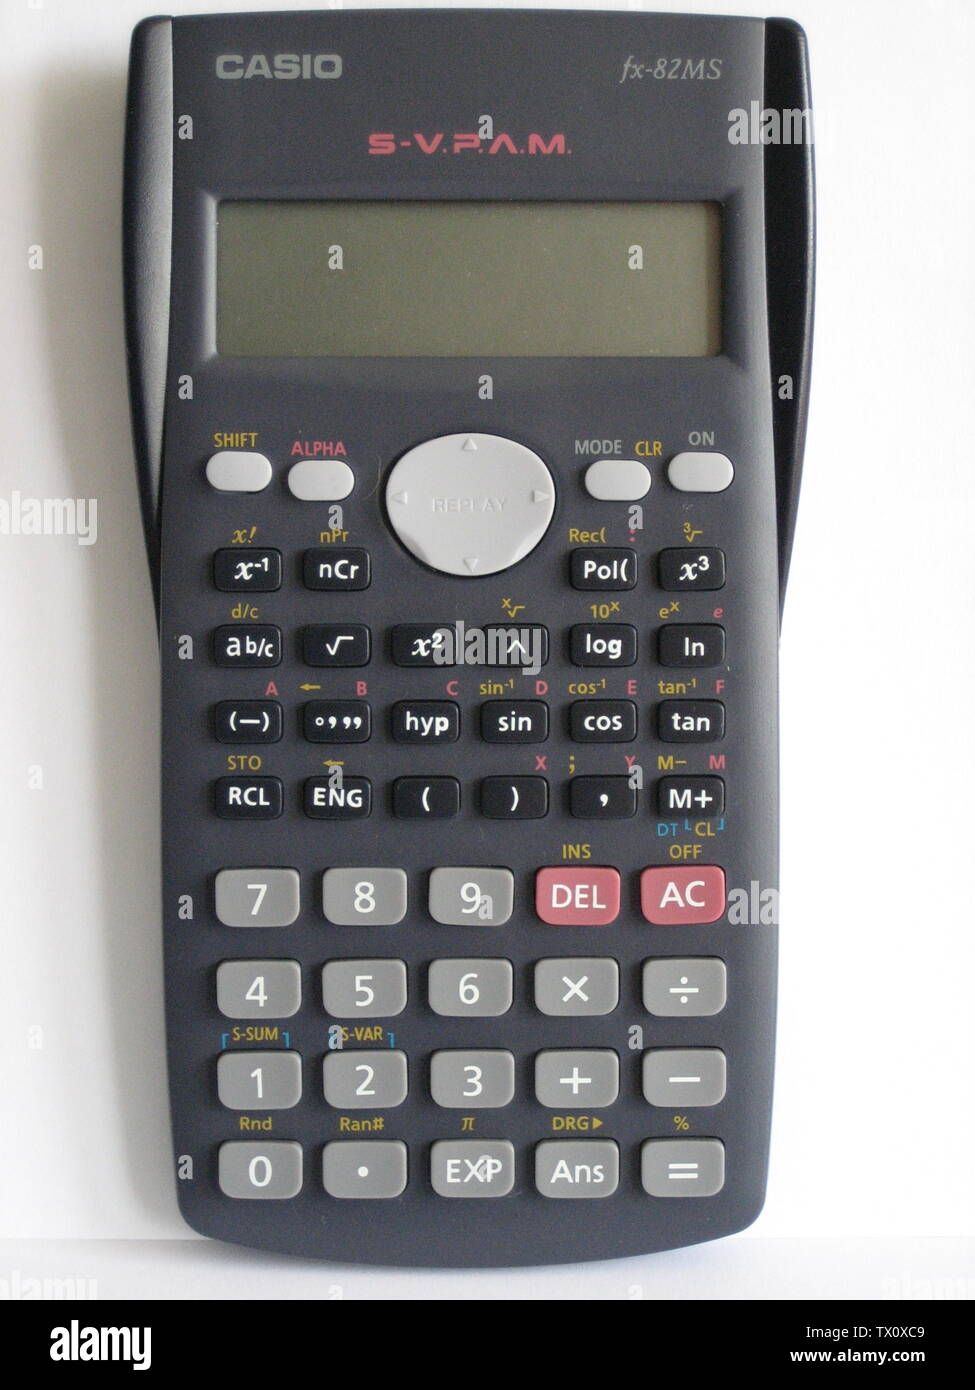 Casio Calculator High Resolution Stock Photography and Images - Alamy